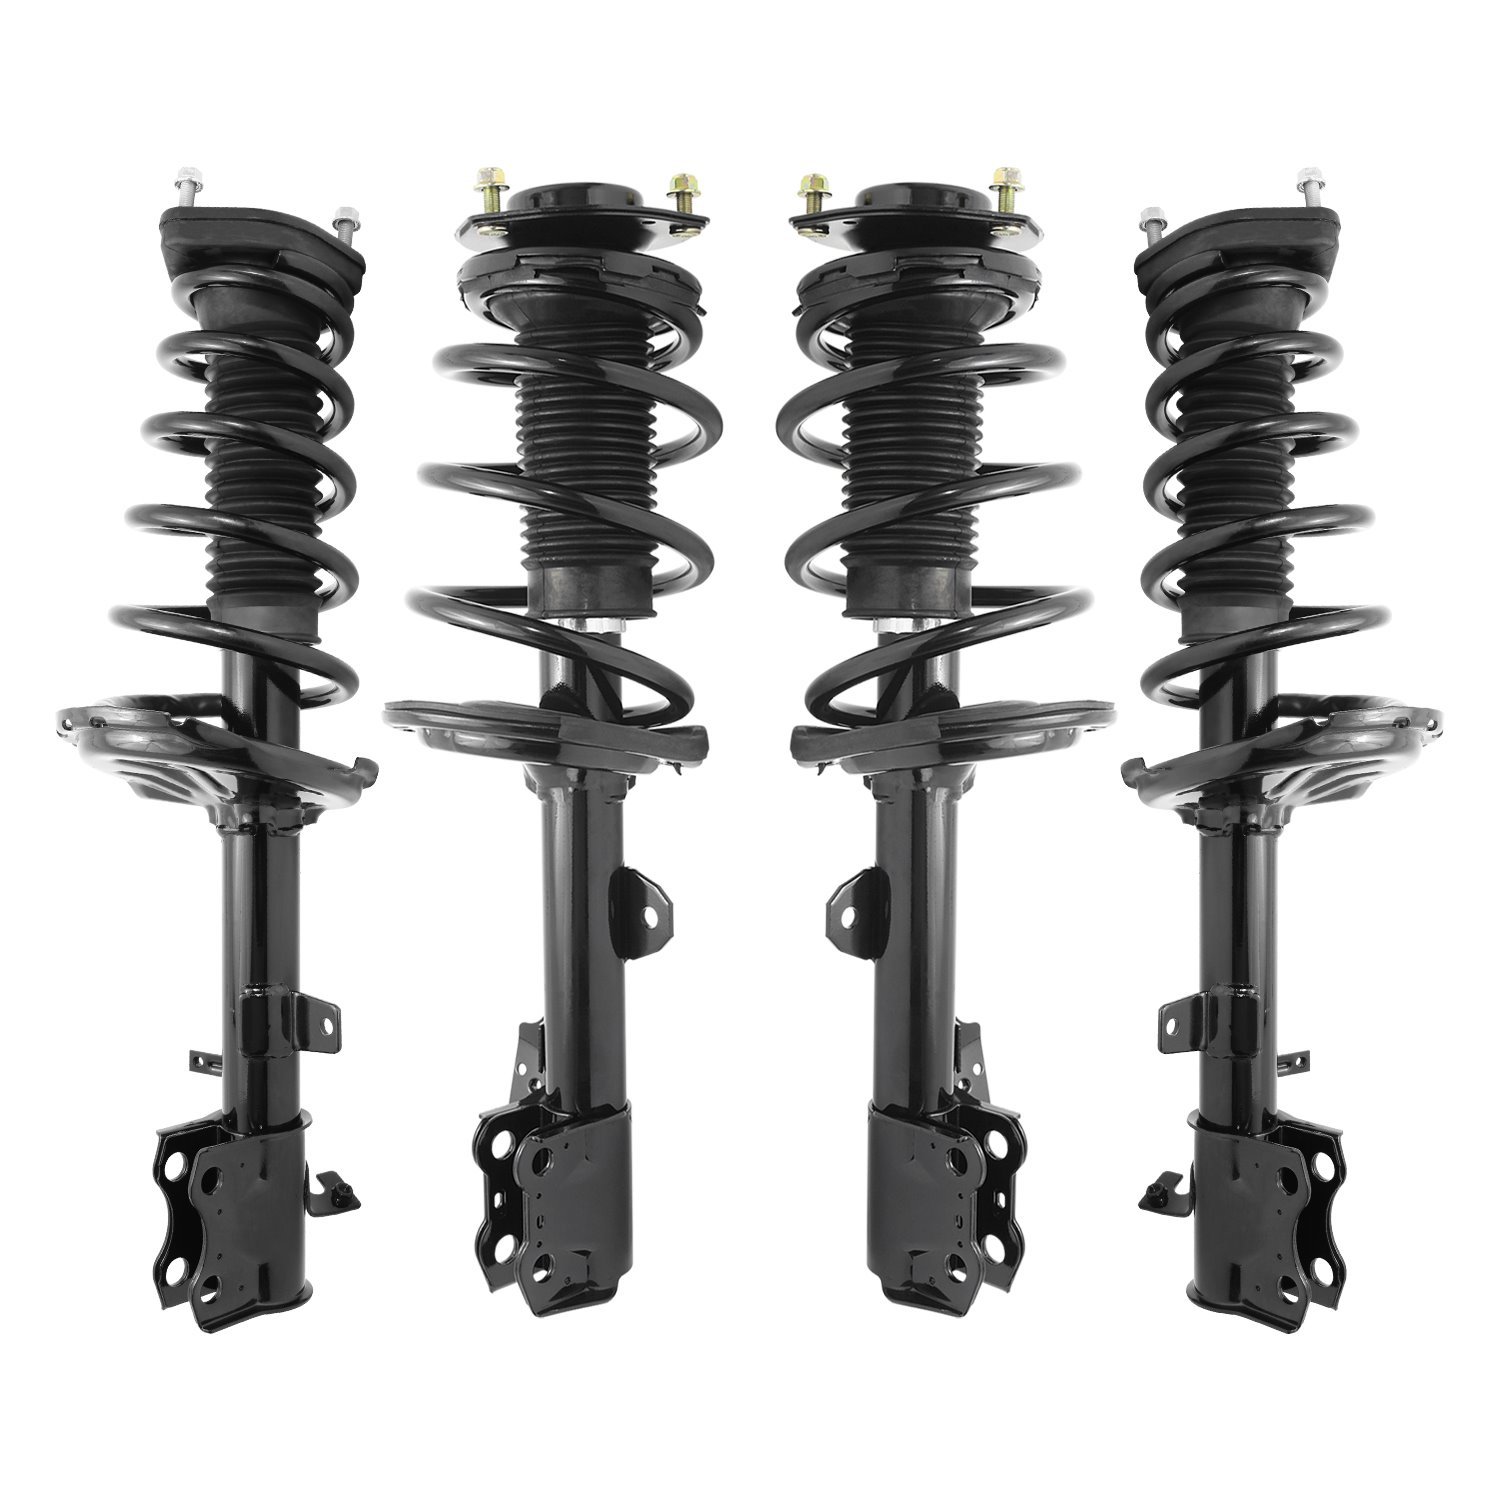 4-11935-15411-001 Front & Rear Suspension Strut & Coil Spring Assembly Kit Fits Select Toyota Venza